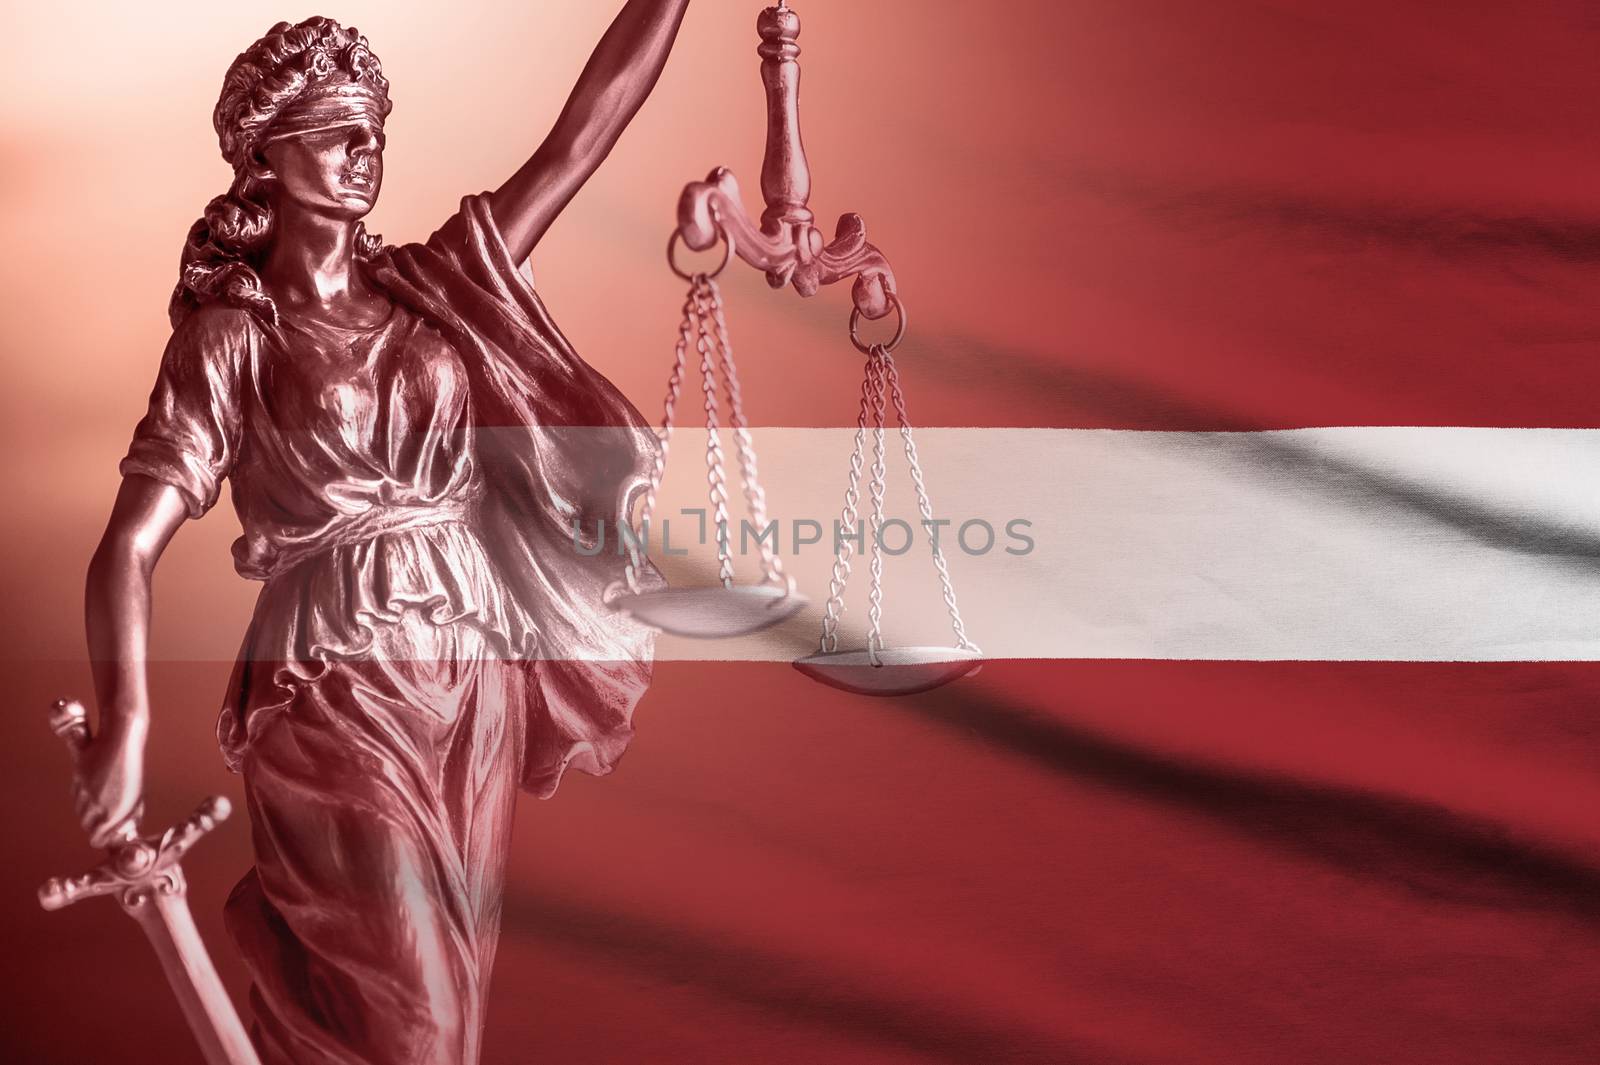 Flag of Latvia with figure of Justice holding up scales and sword conceptual of law enforcement and impartiality with copy space